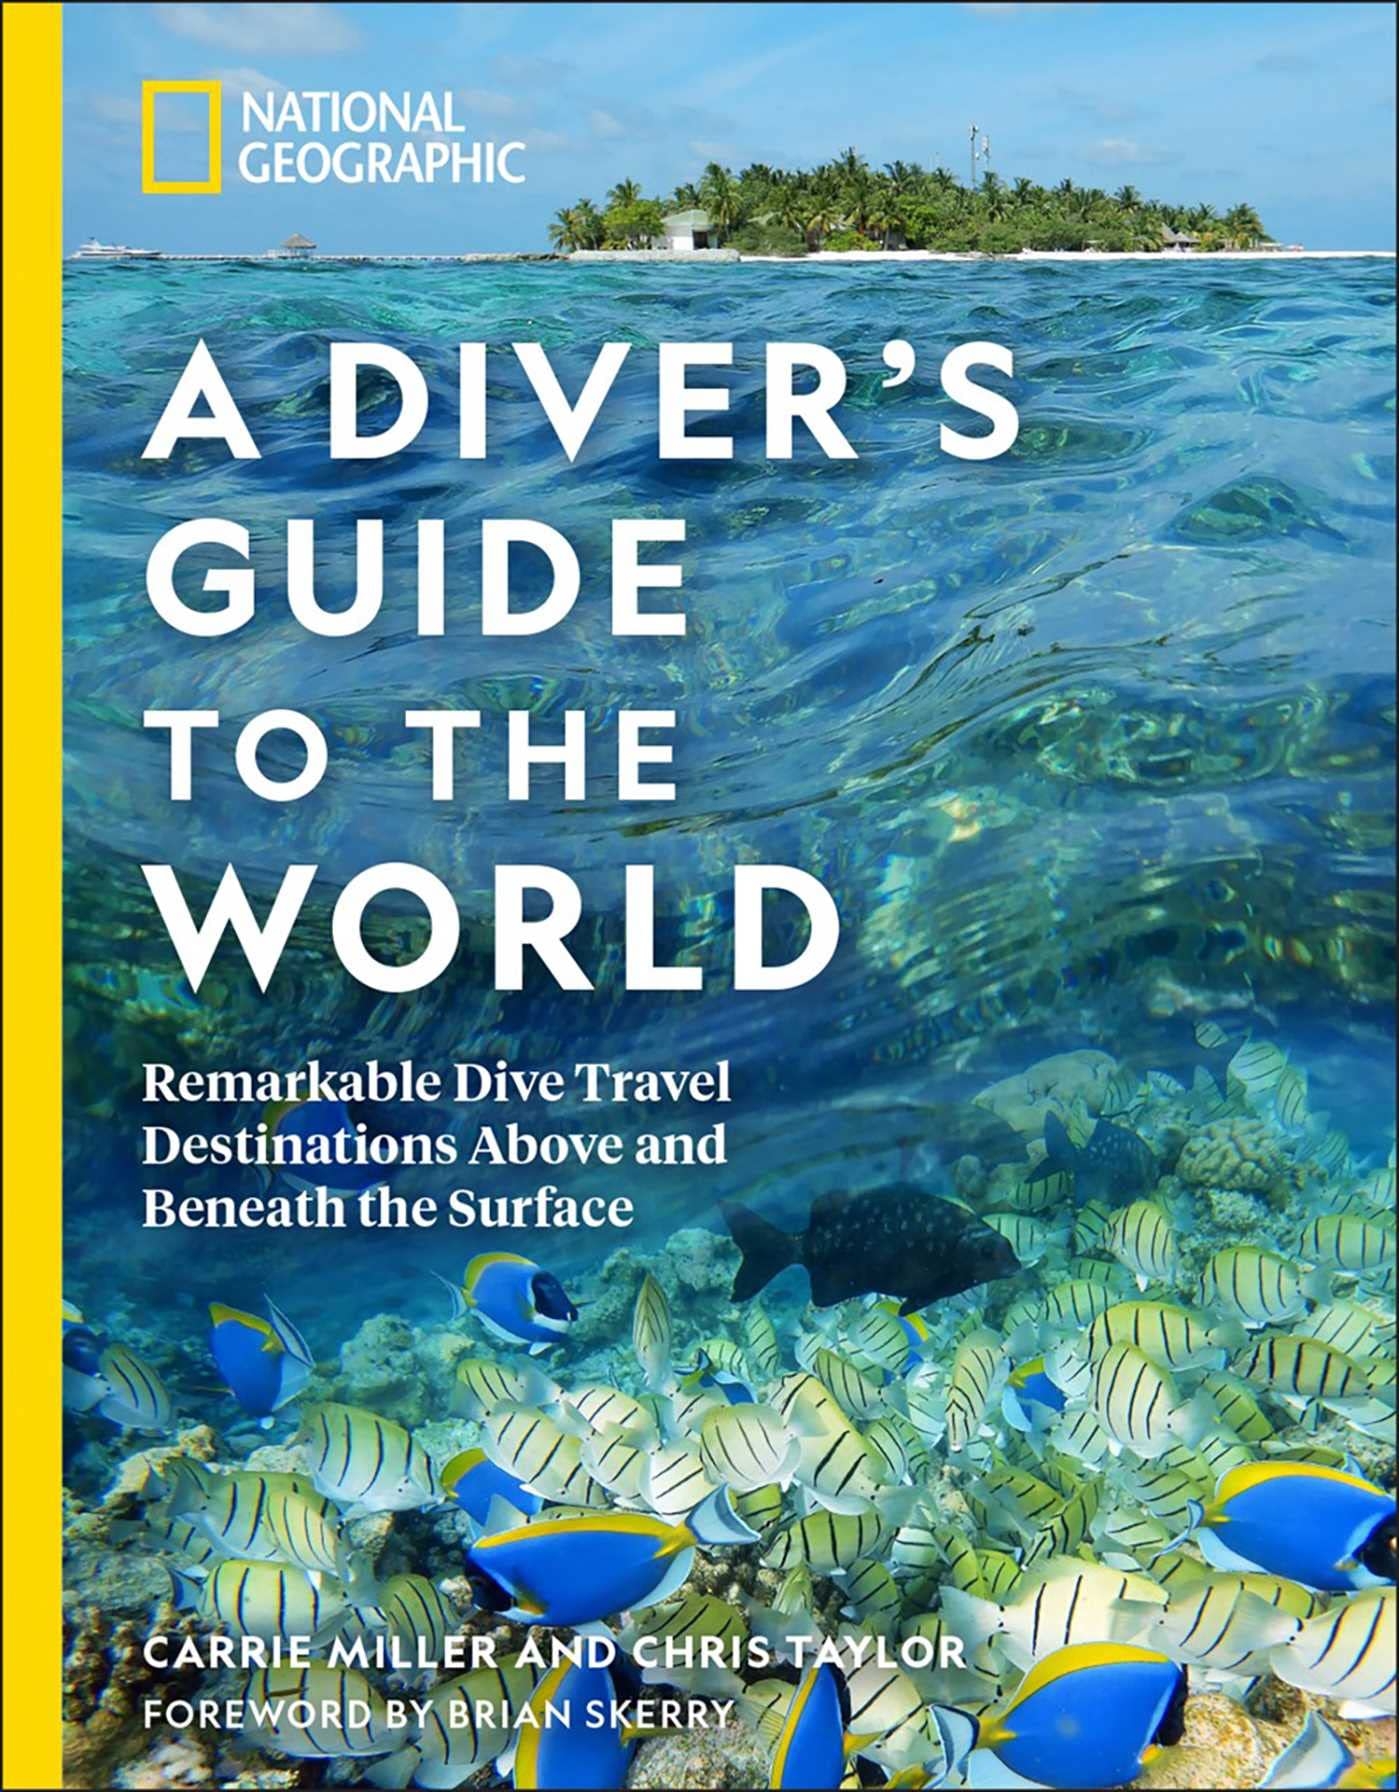 National Geographic A Diver’s Guide to the World